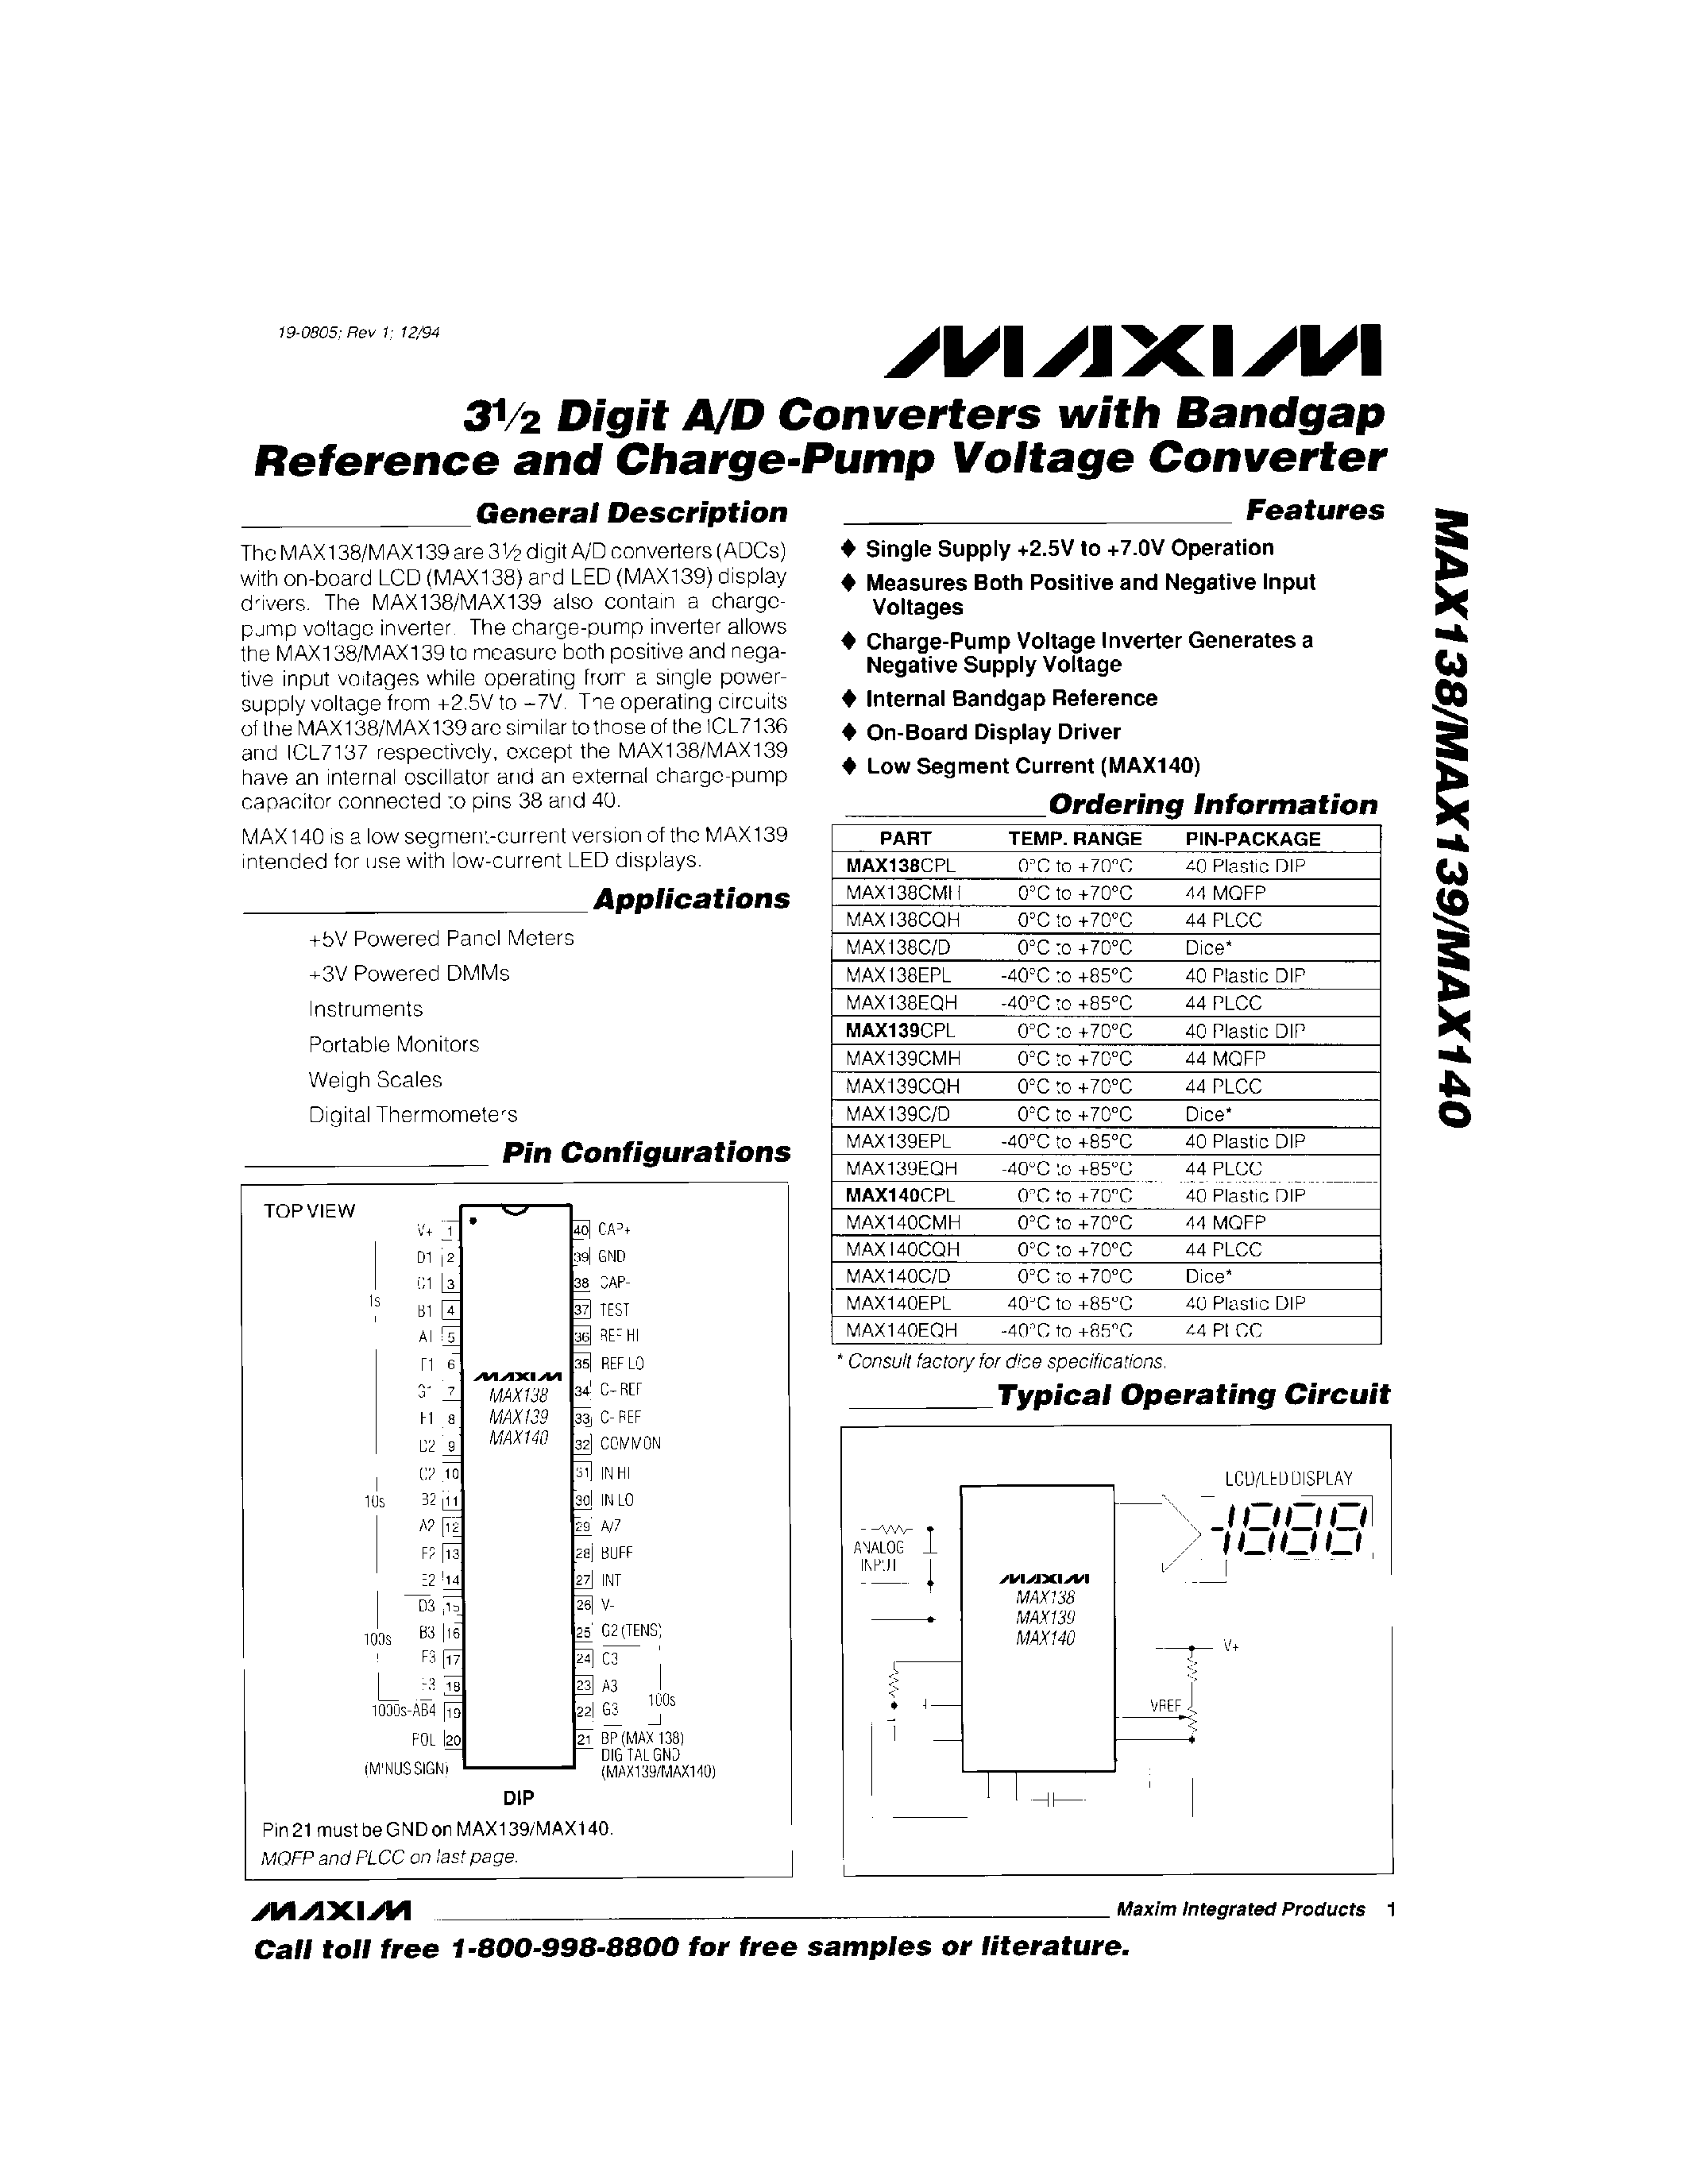 Даташит MAX138C/D - 3Digit A/D Converters with Bandgap Refrence and Charge-Pump Voltage Converter страница 1